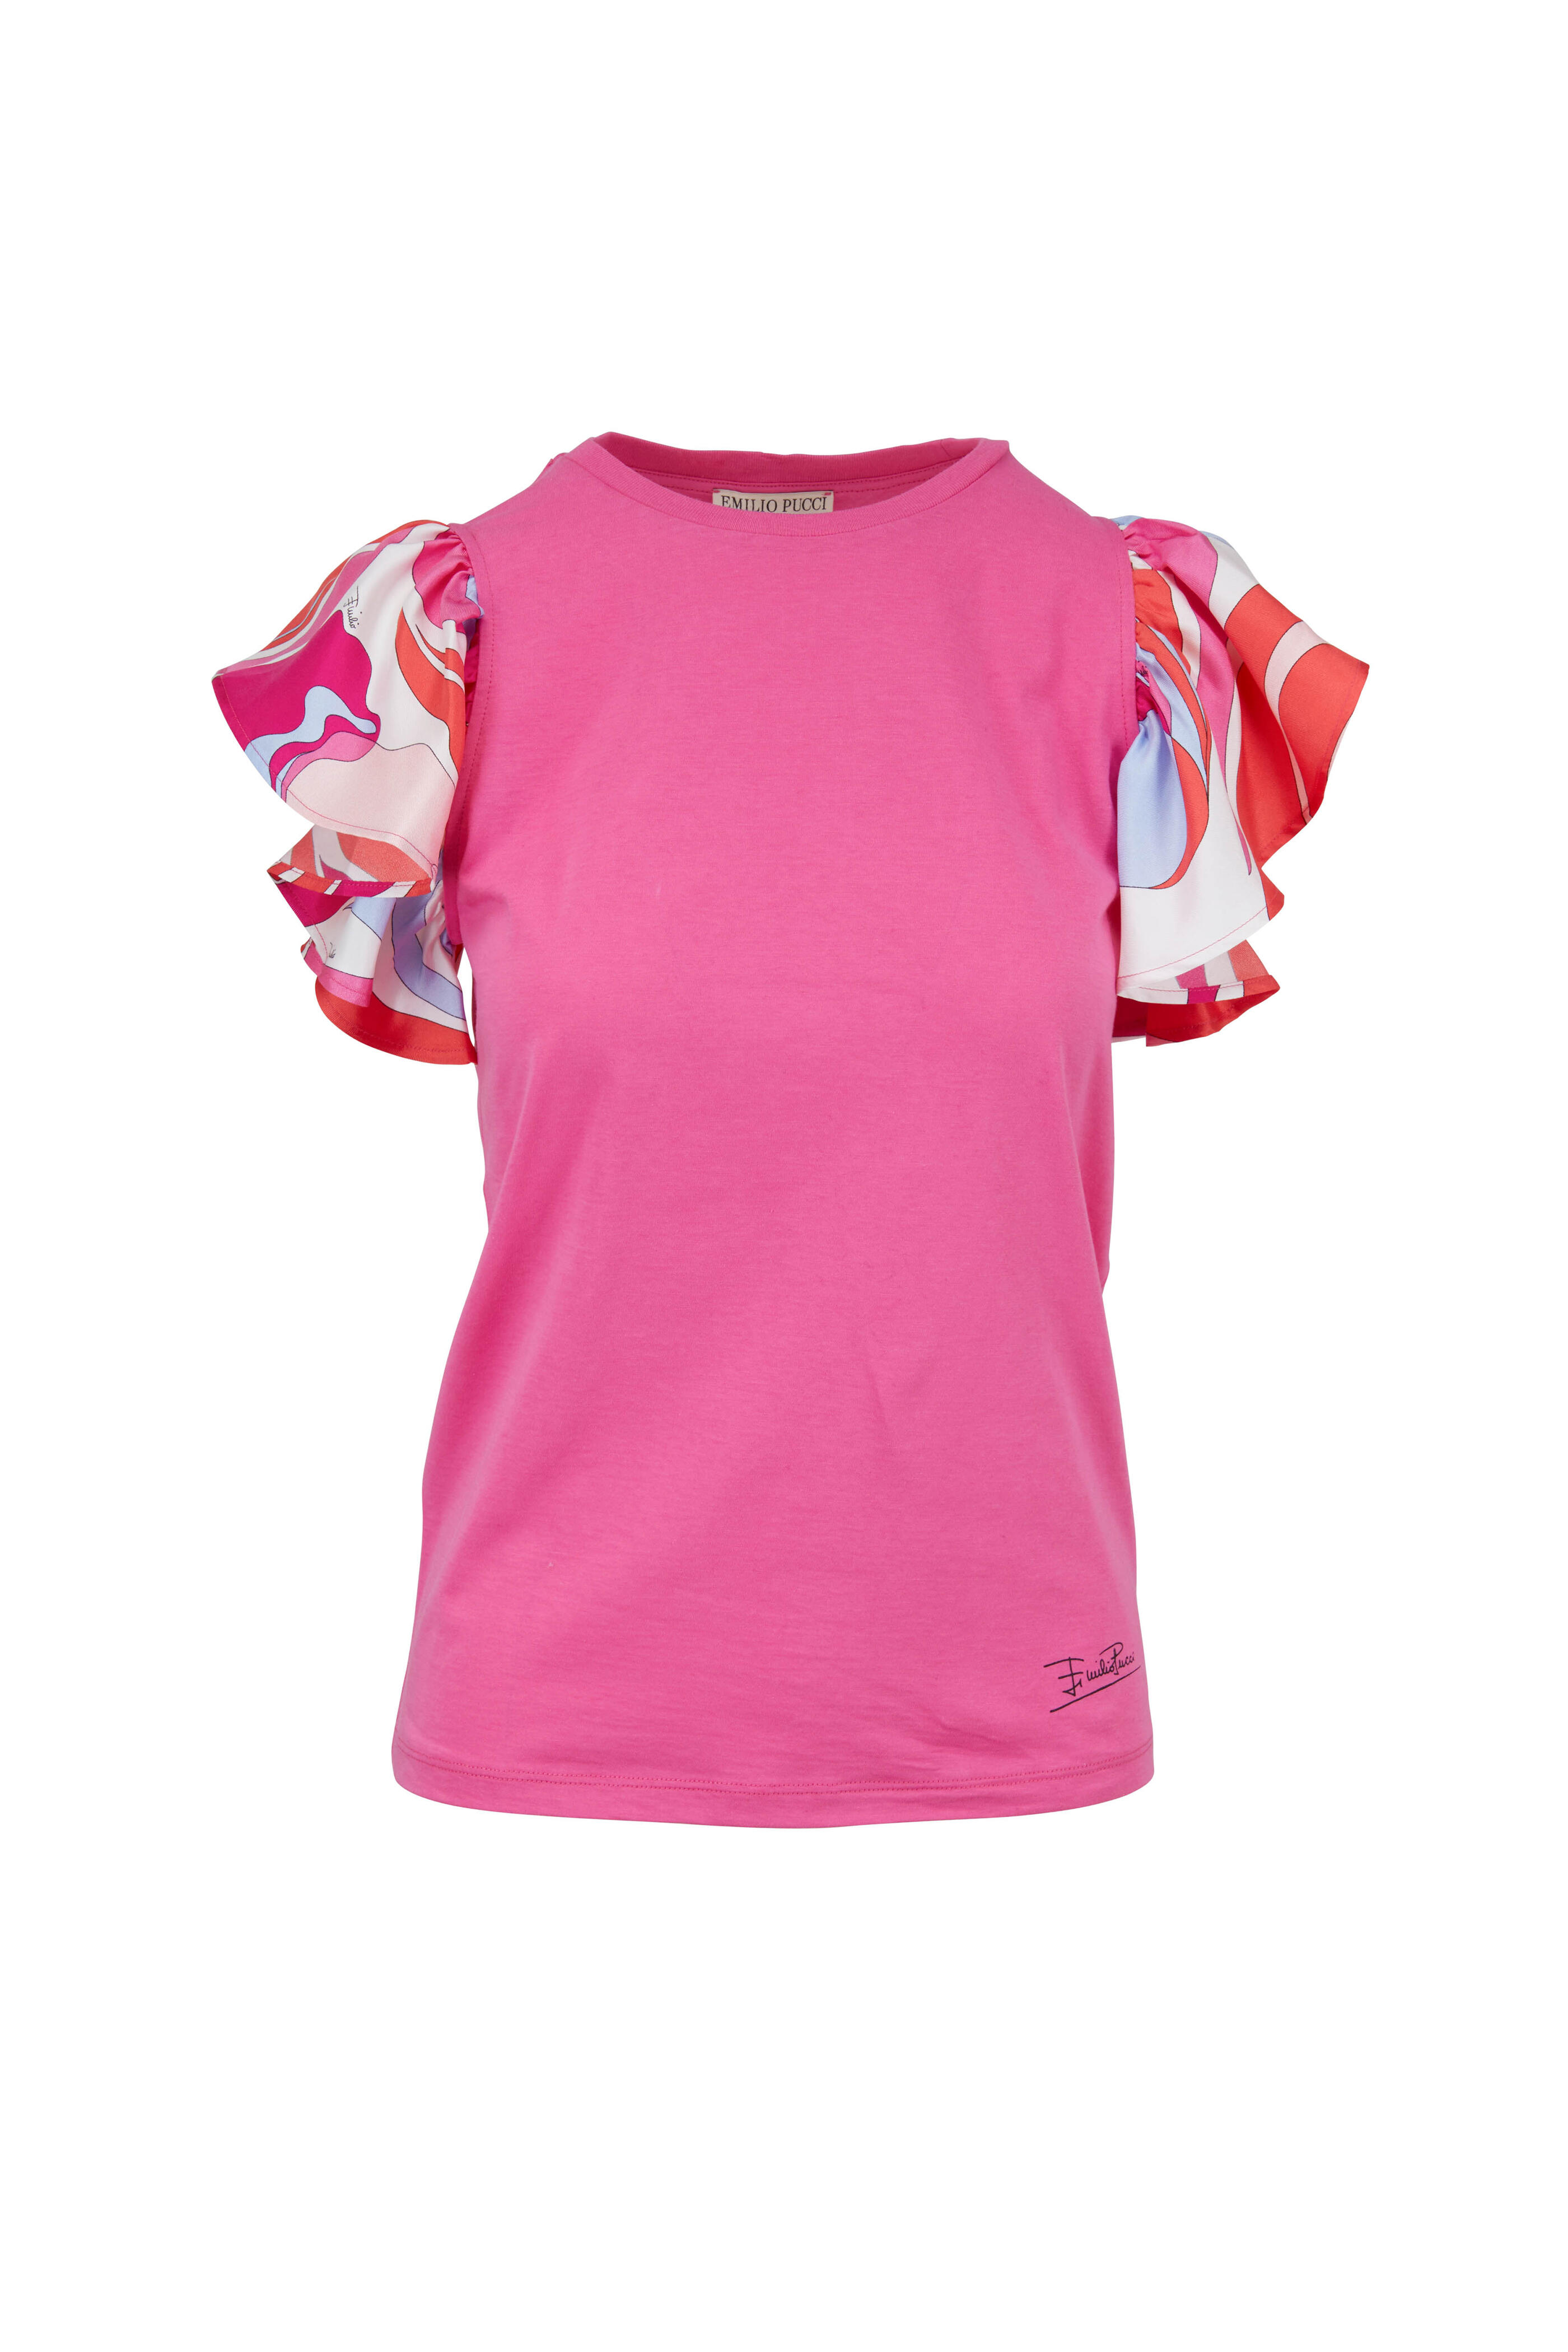 Pucci - Pink Printed Ruffle Sleeve T-Shirt | Mitchell Stores